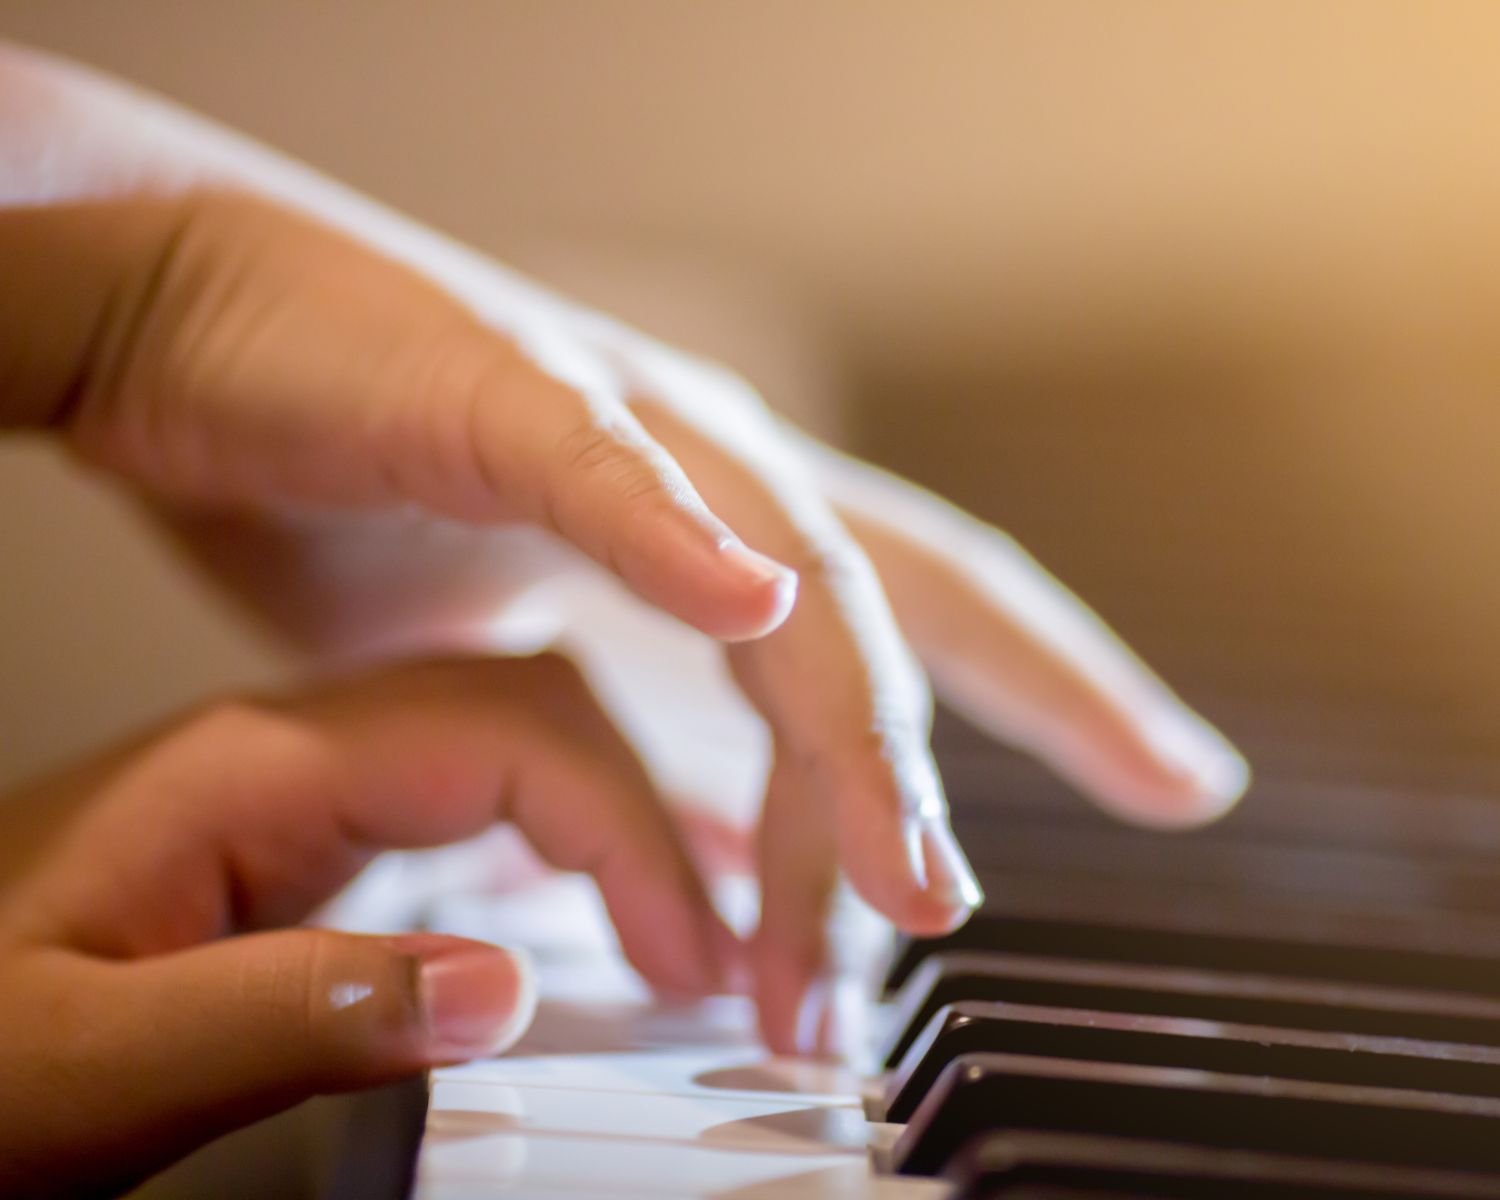 5 tips for improving finger agility at the piano